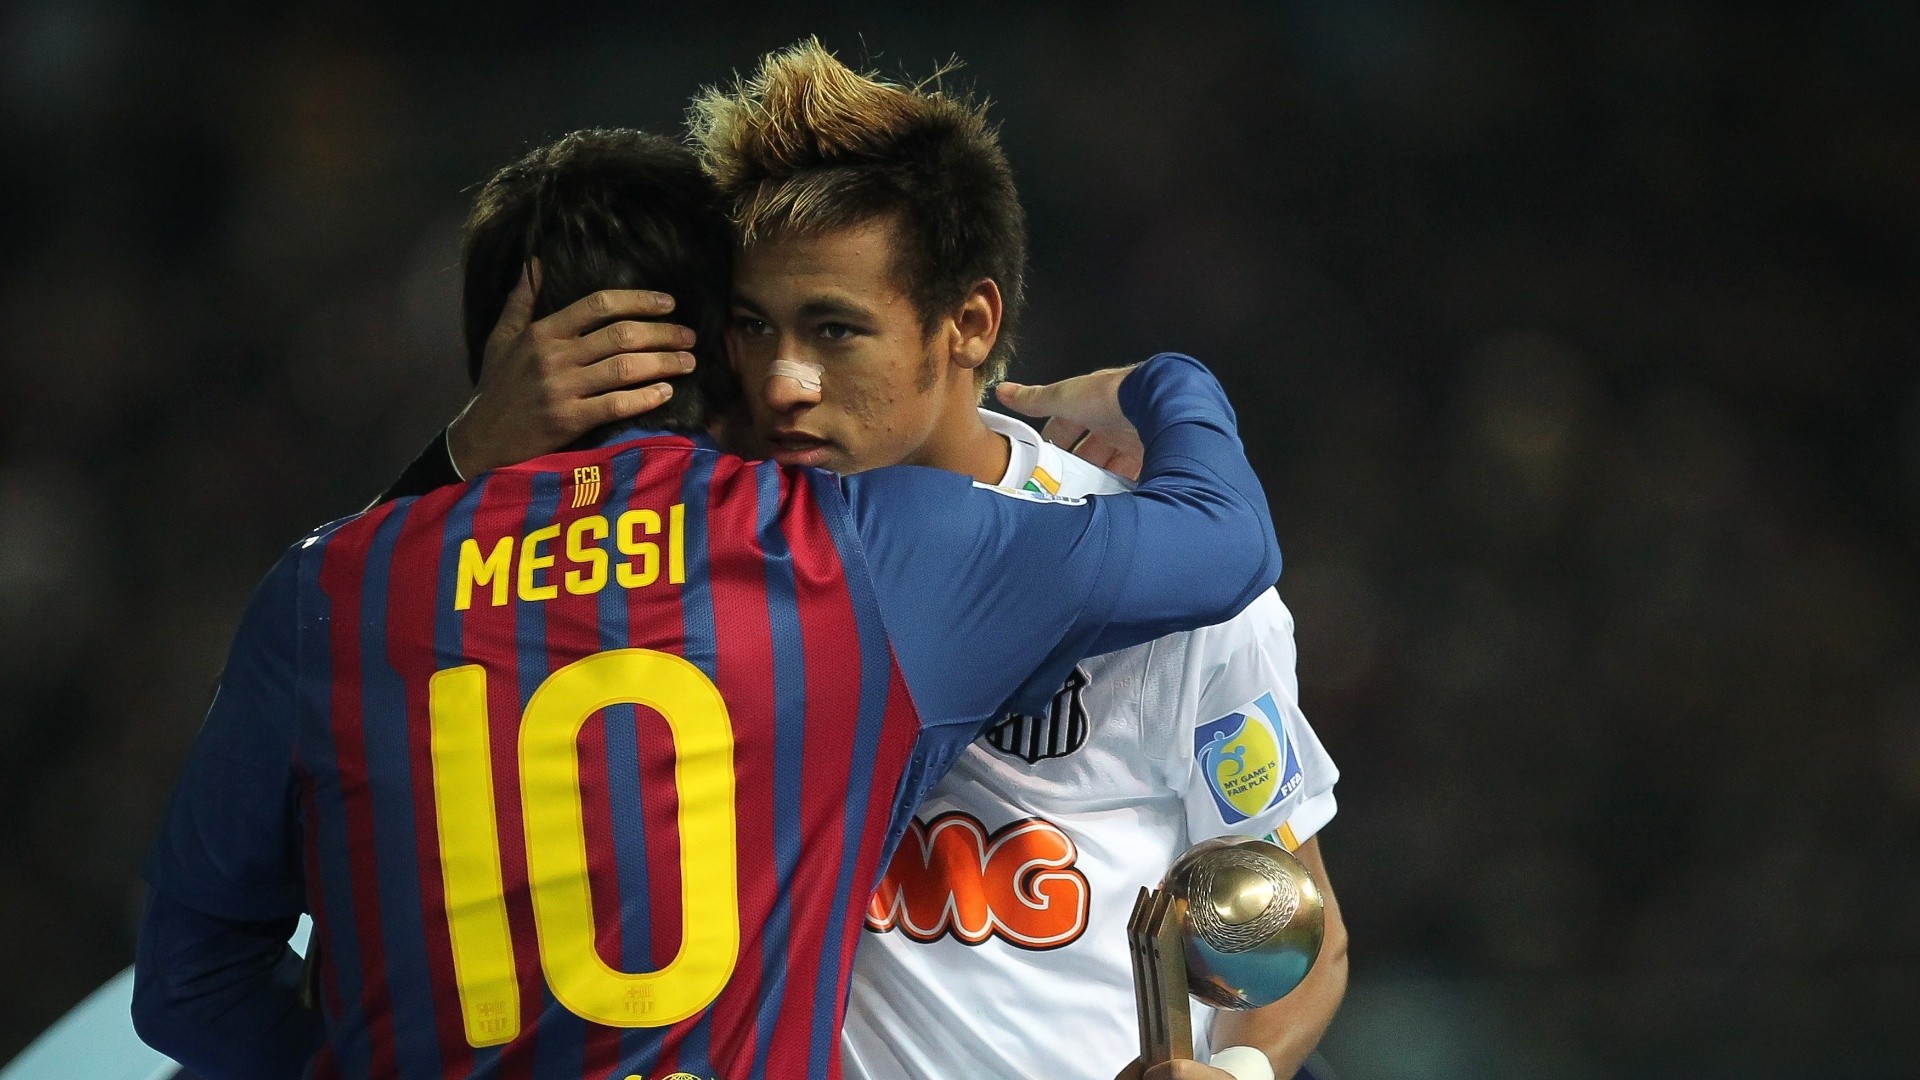 Lionel Messi Iphone Wallpaper - Messi And Neymar 2011 , HD Wallpaper & Backgrounds